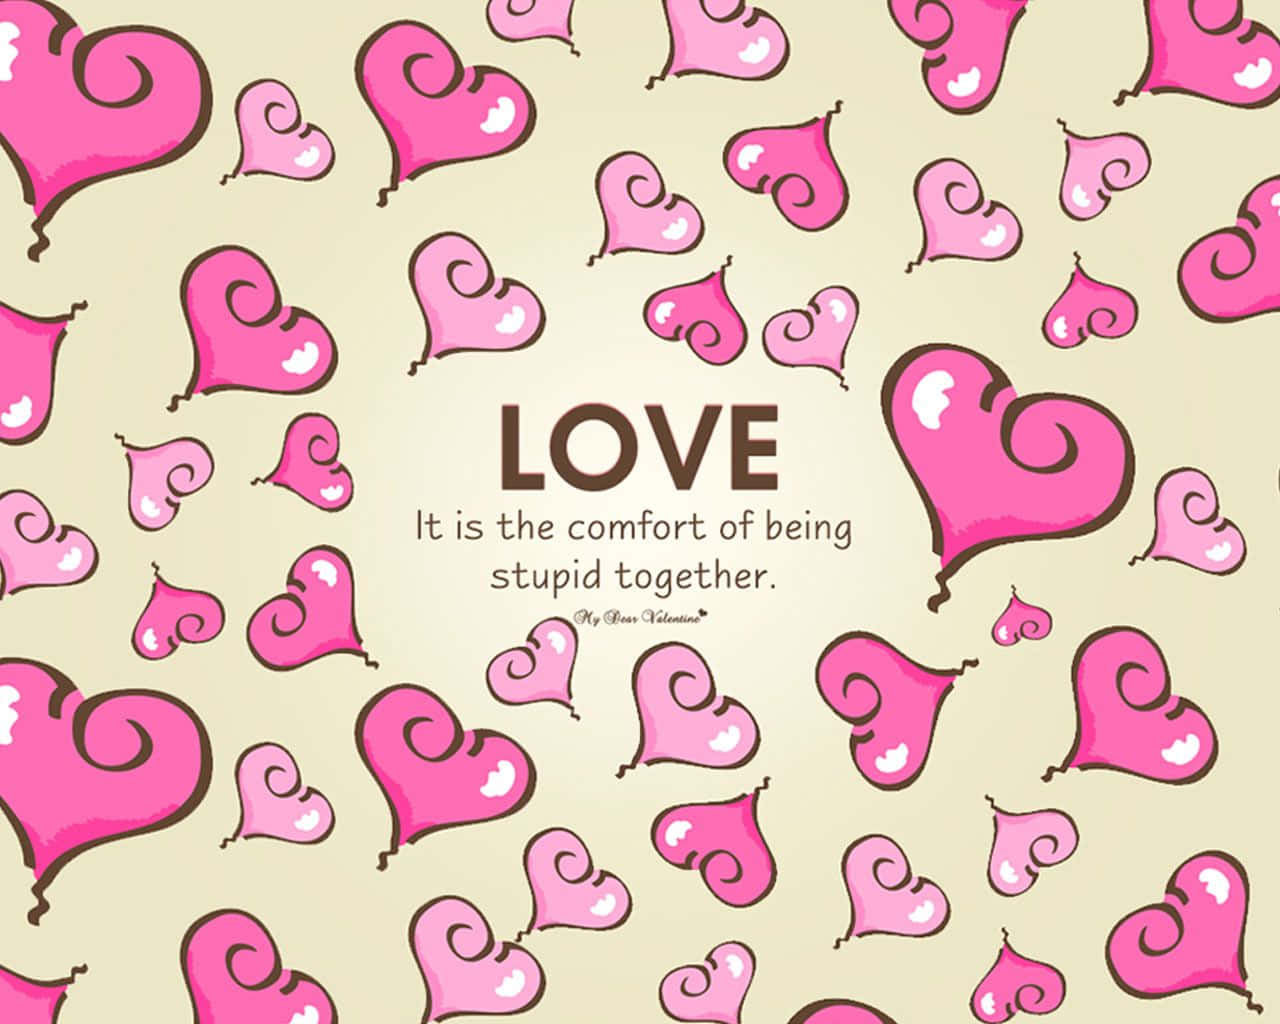 Valentines Day iPhone wallpaper candy hearts  Valentines wallpaper  iphone Valentines wallpaper Cute patterns wallpaper